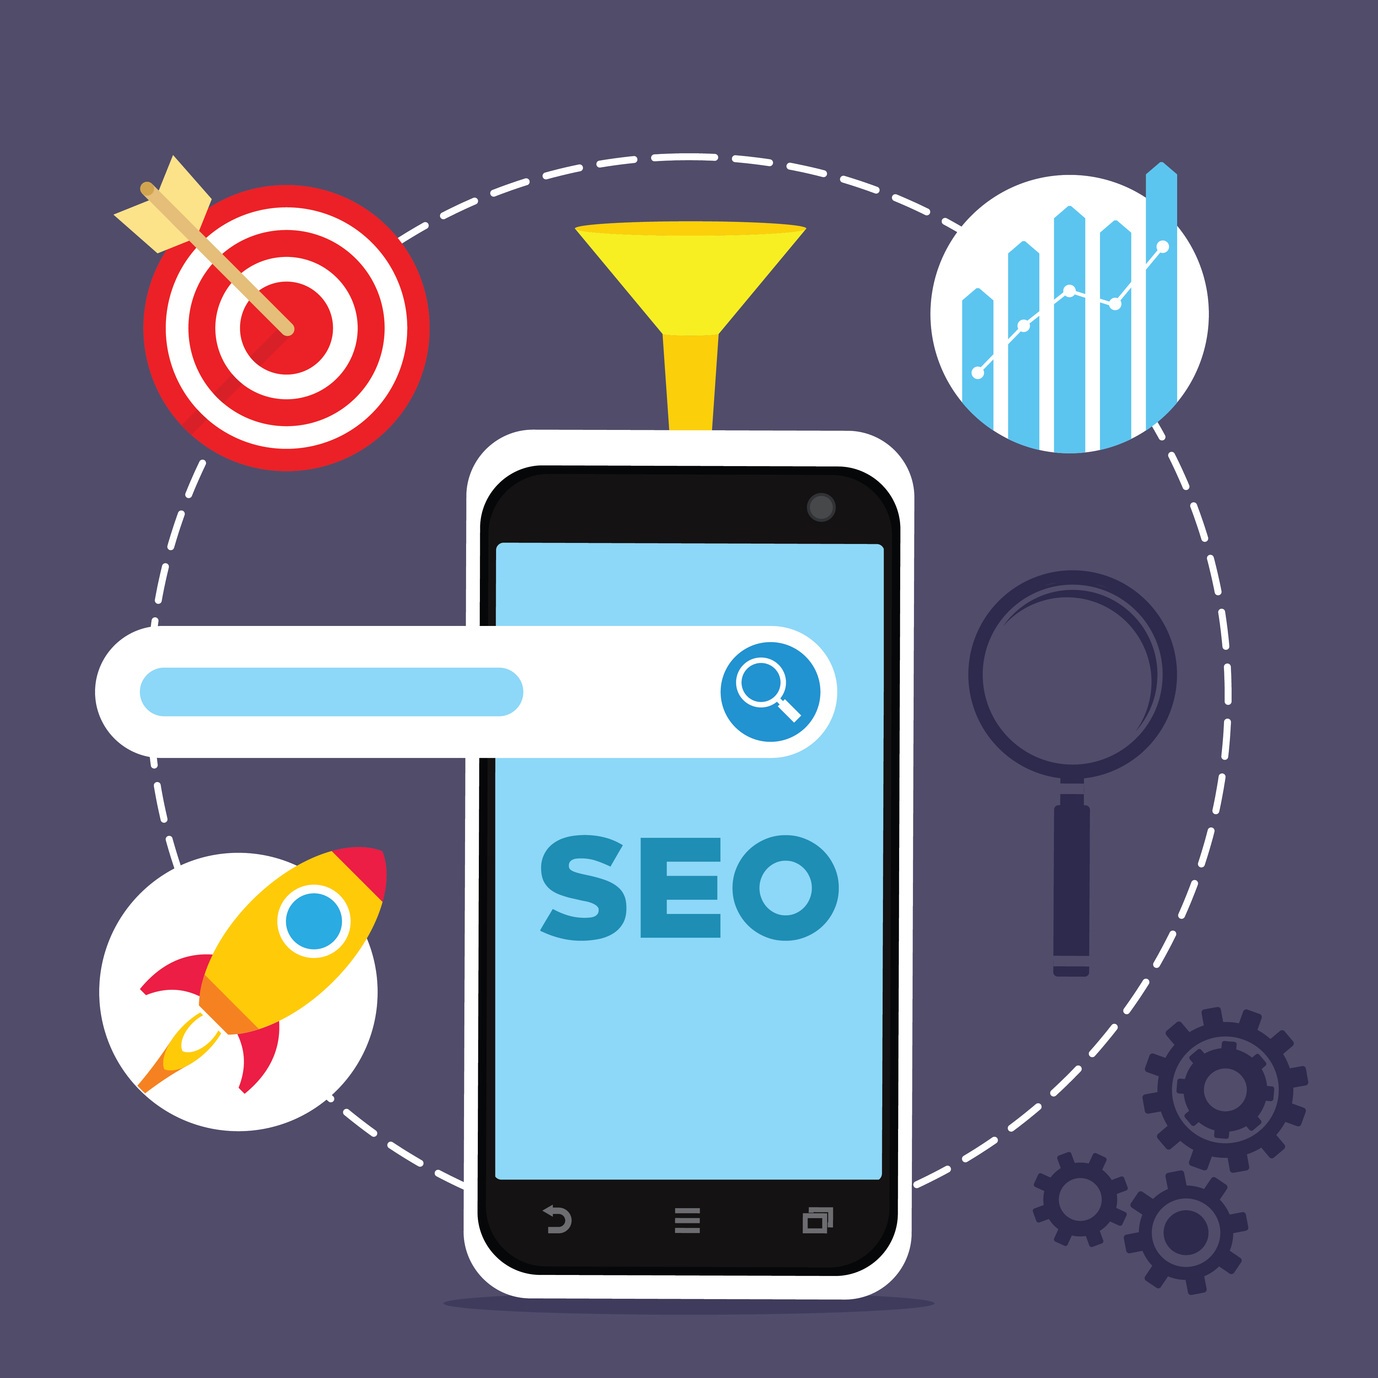 7 Mobile SEO Tips You Need Right Now